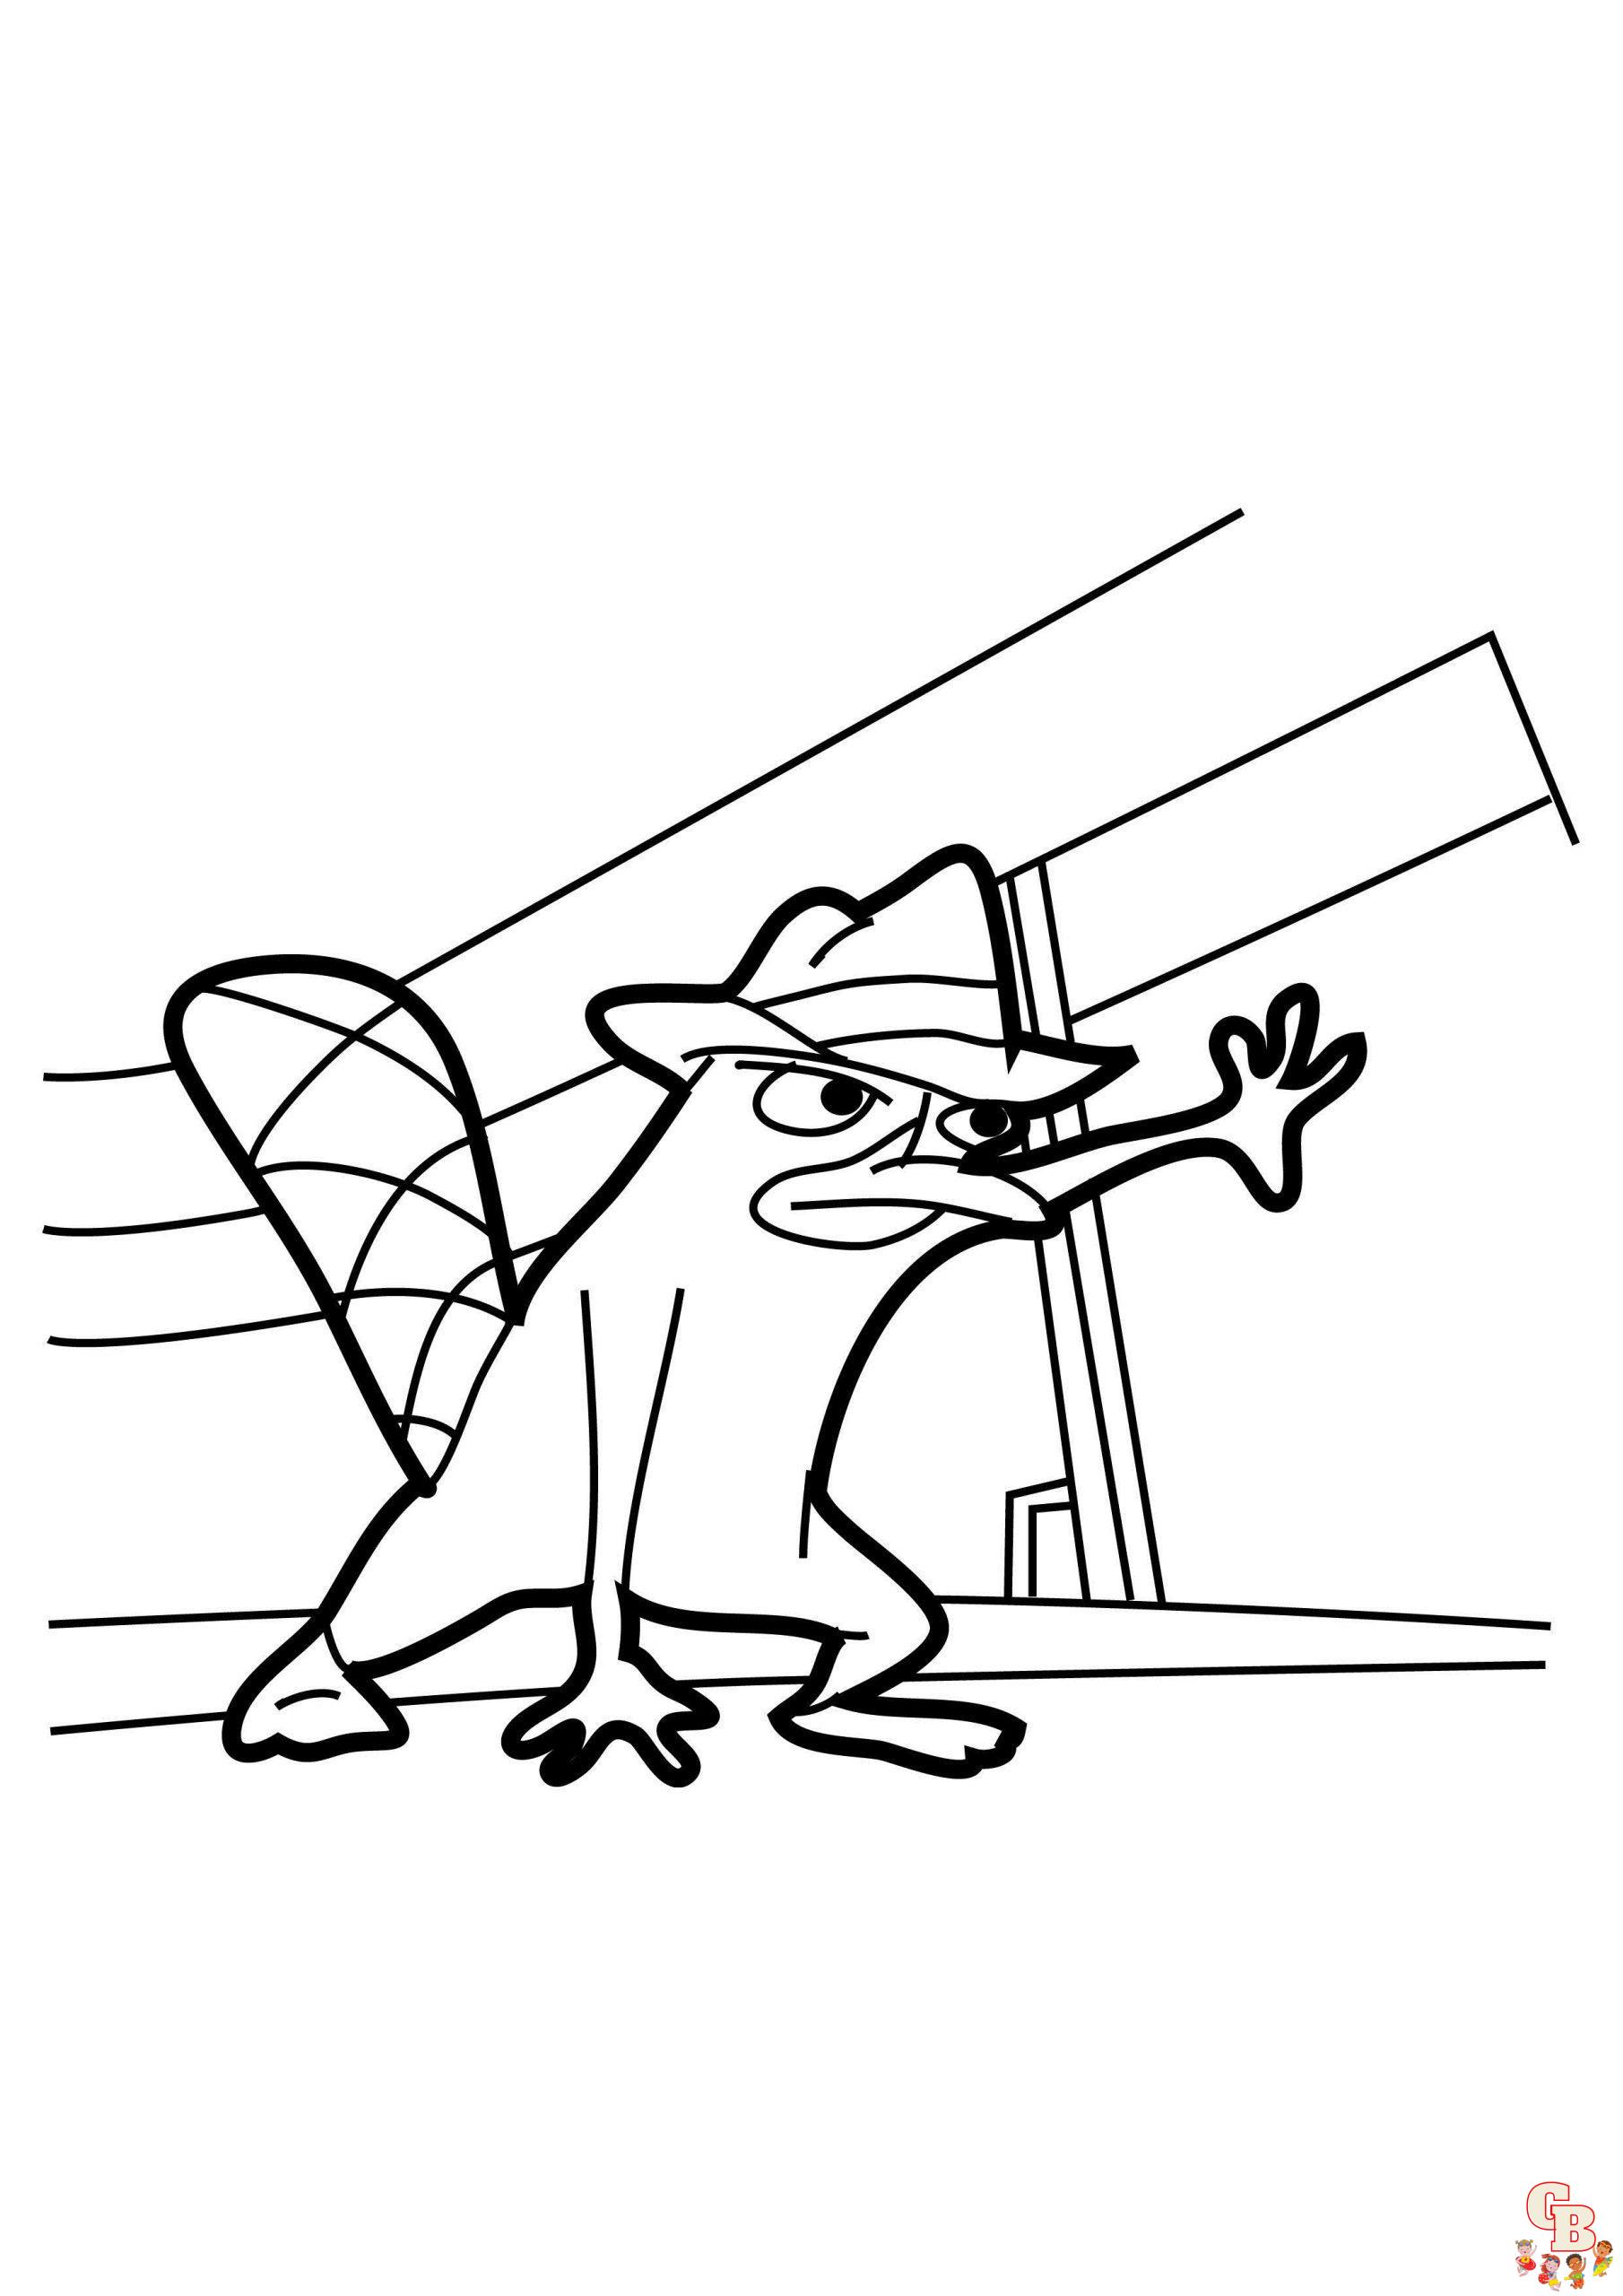 Perry the Platypus Coloring Pages 3